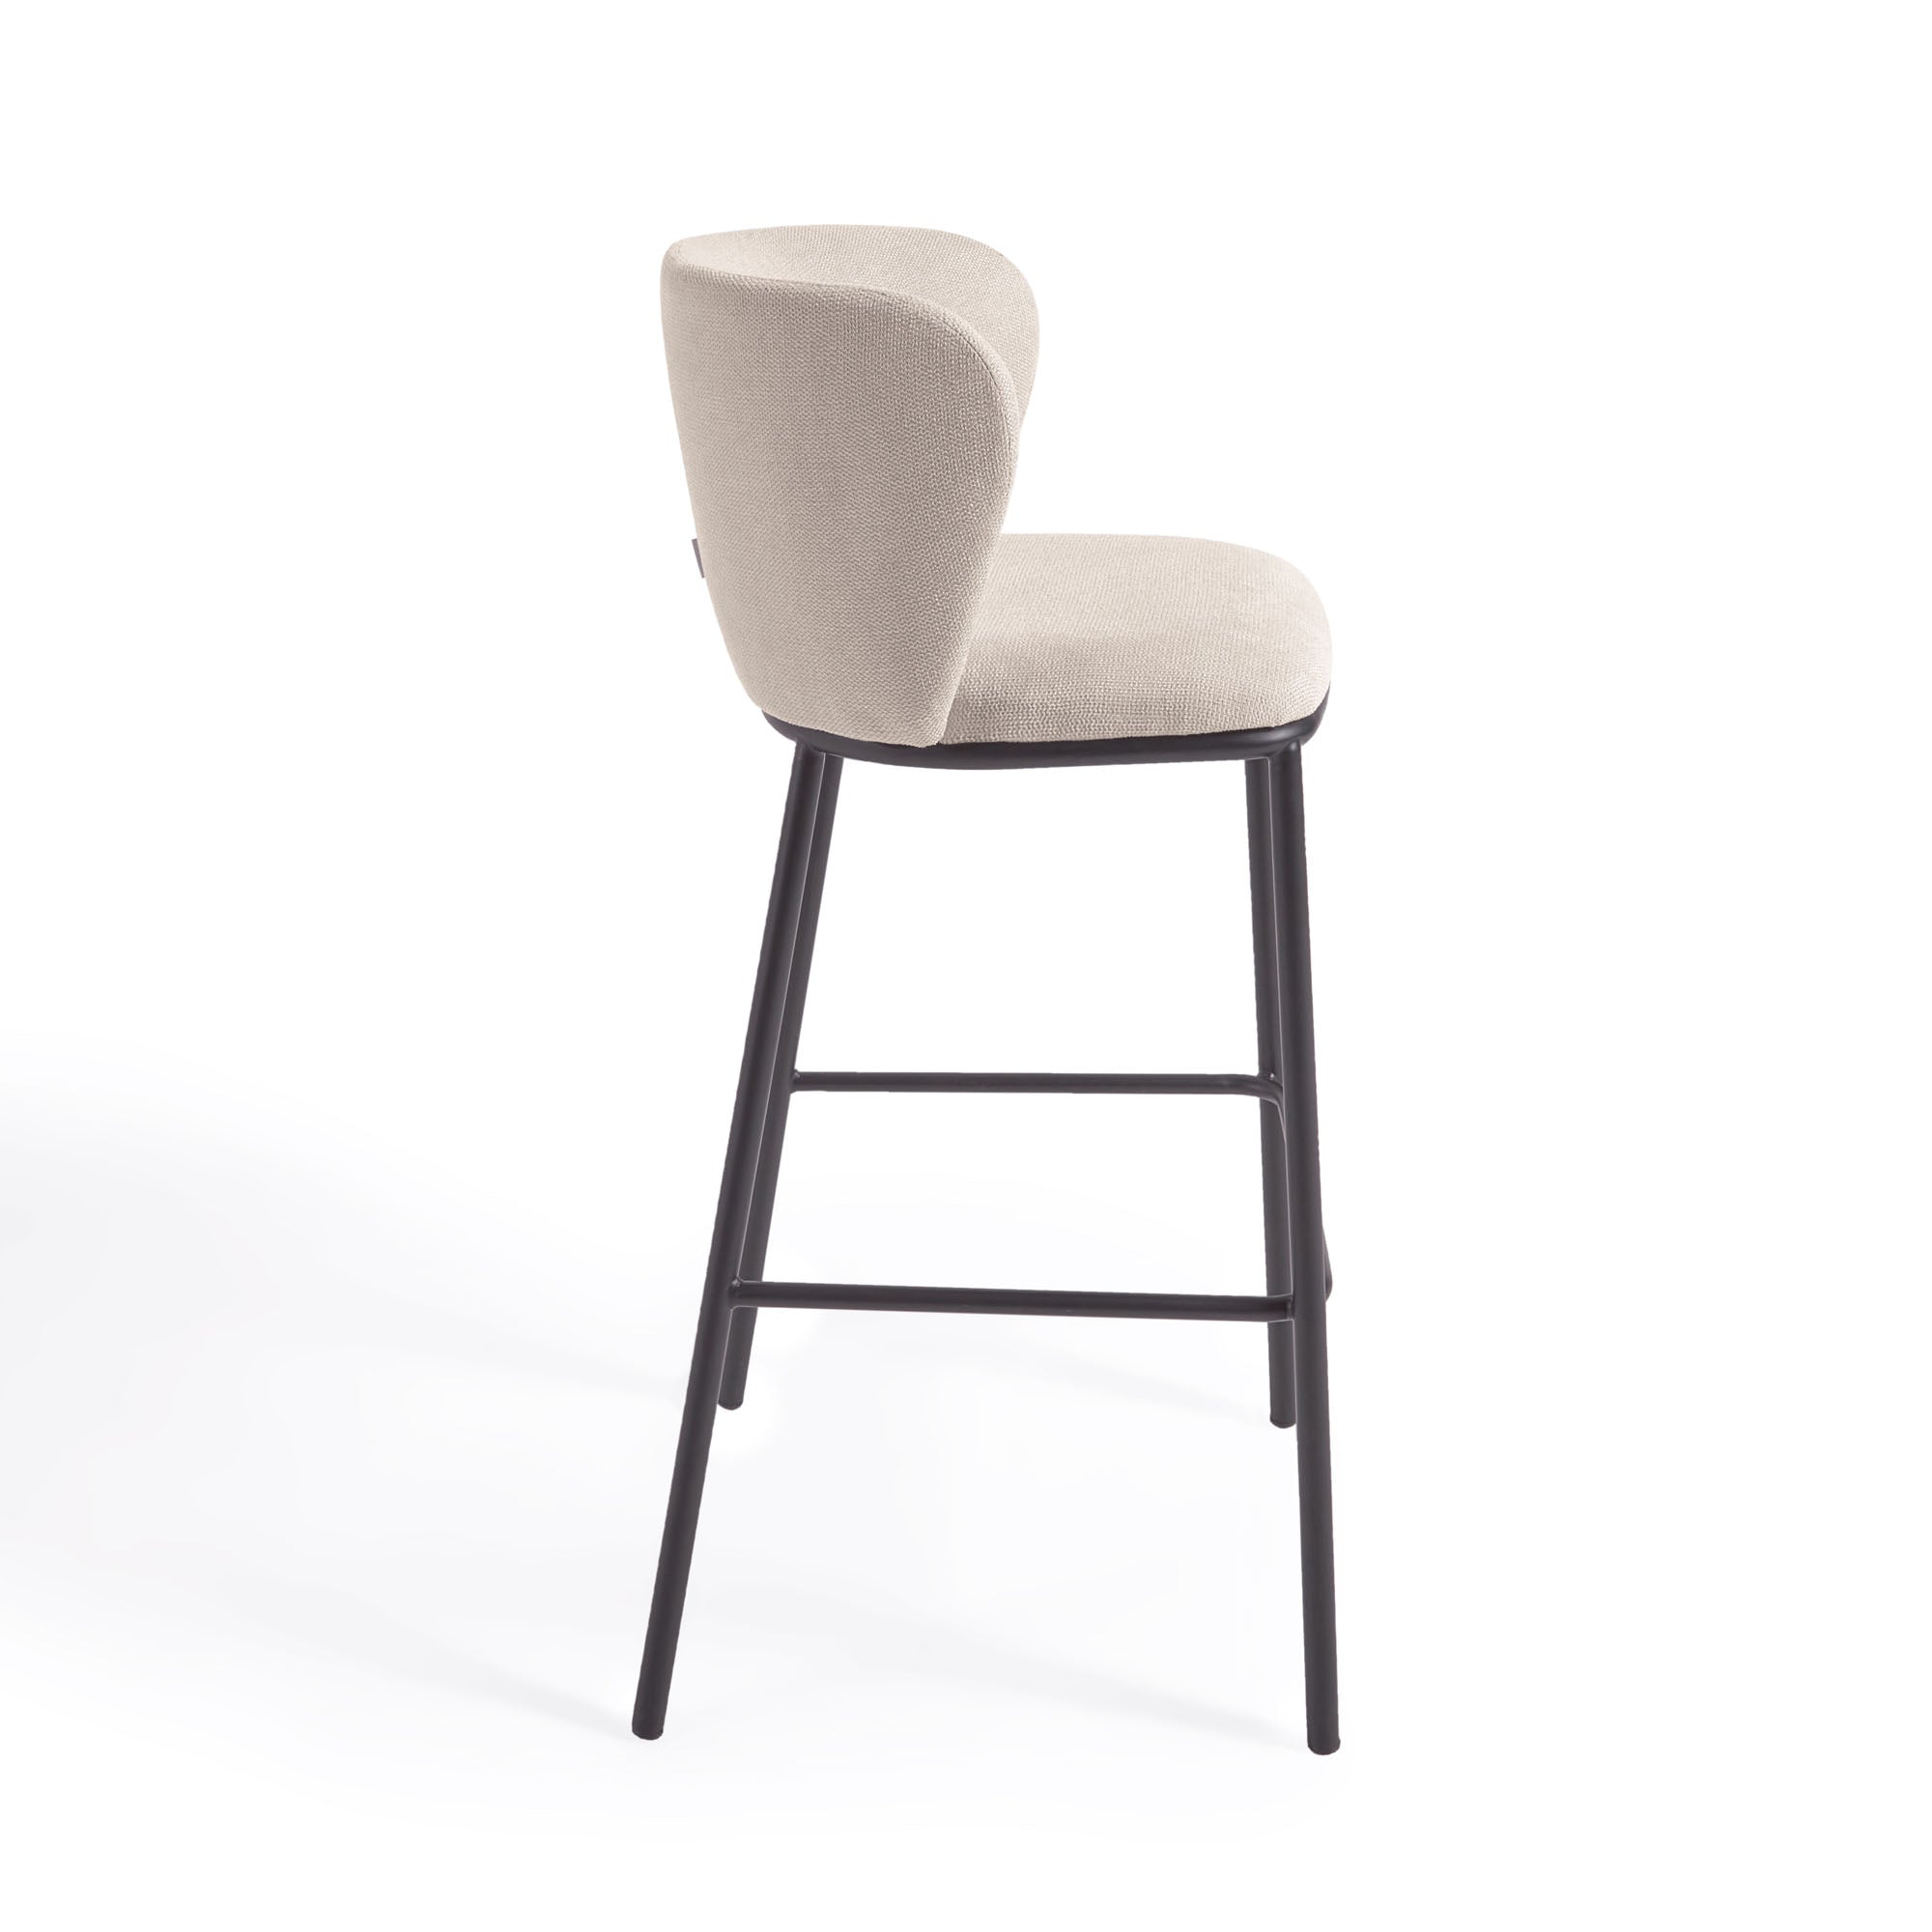 Ciselia stool in beige chenille and black steel, height 75 cm